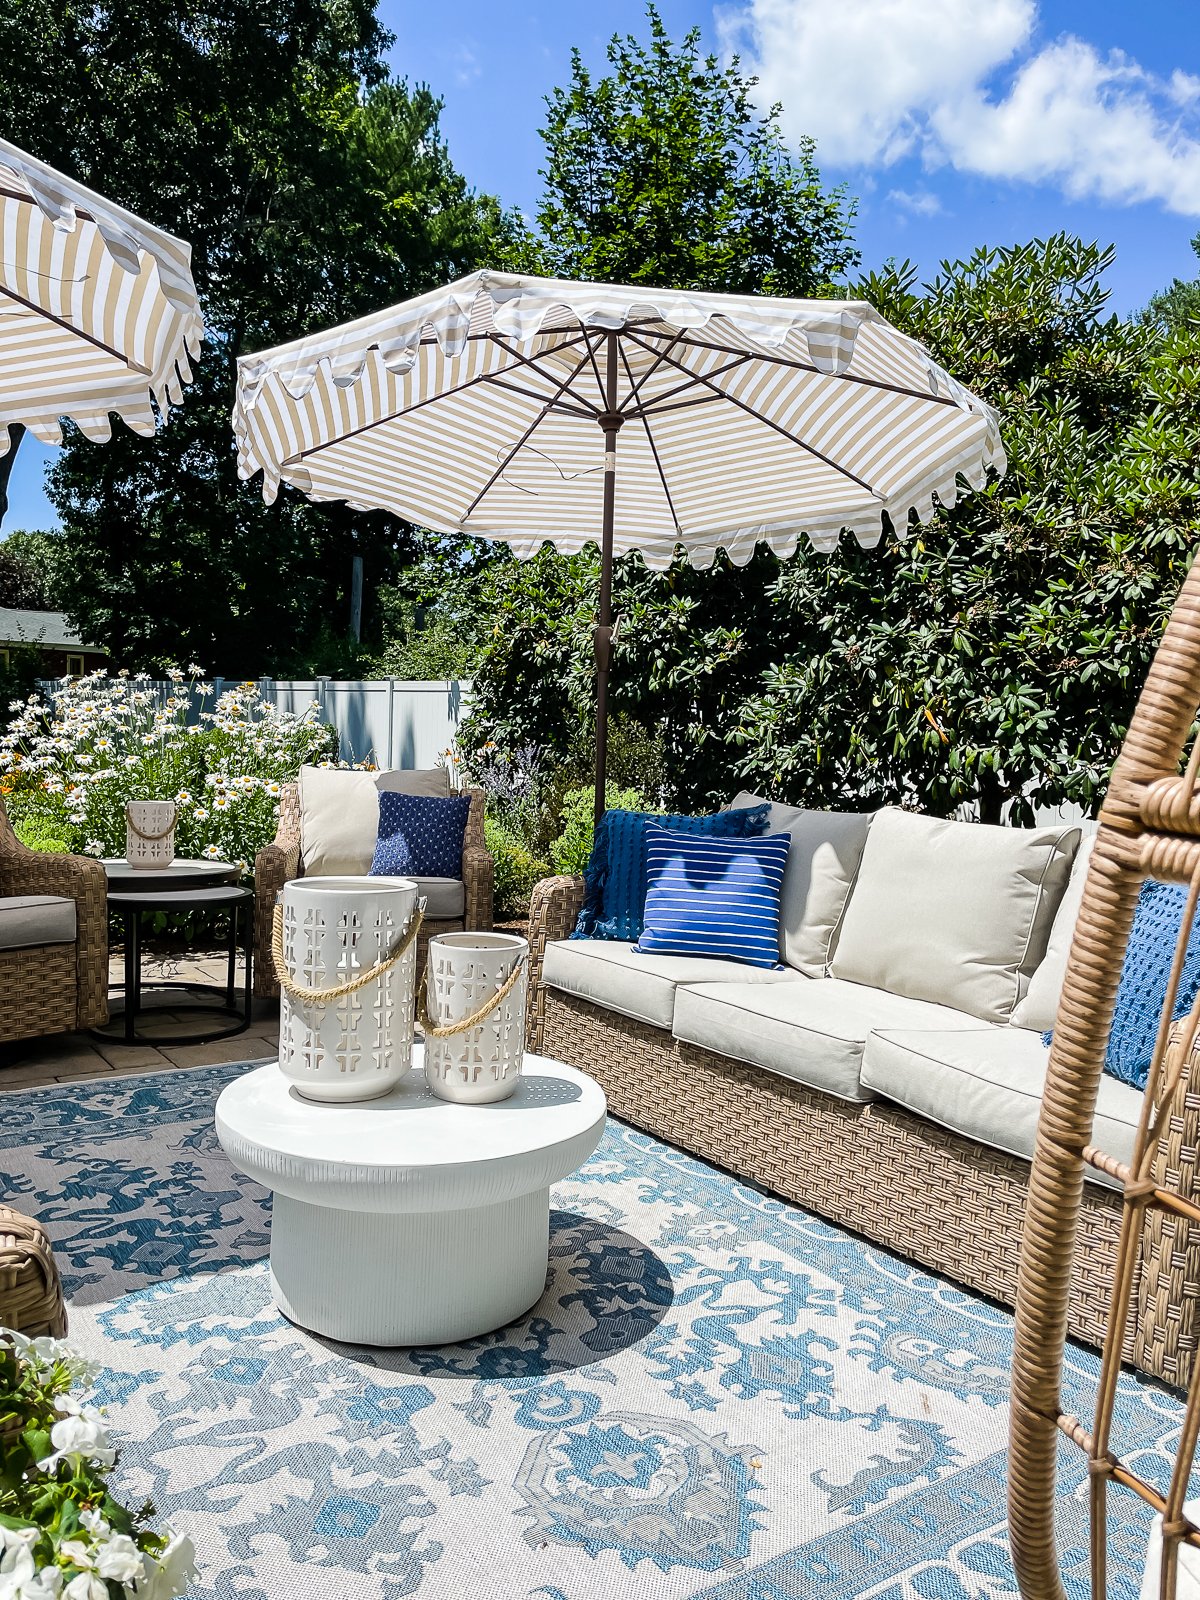 patio furniture with patio umbrellas and blue throw pillows